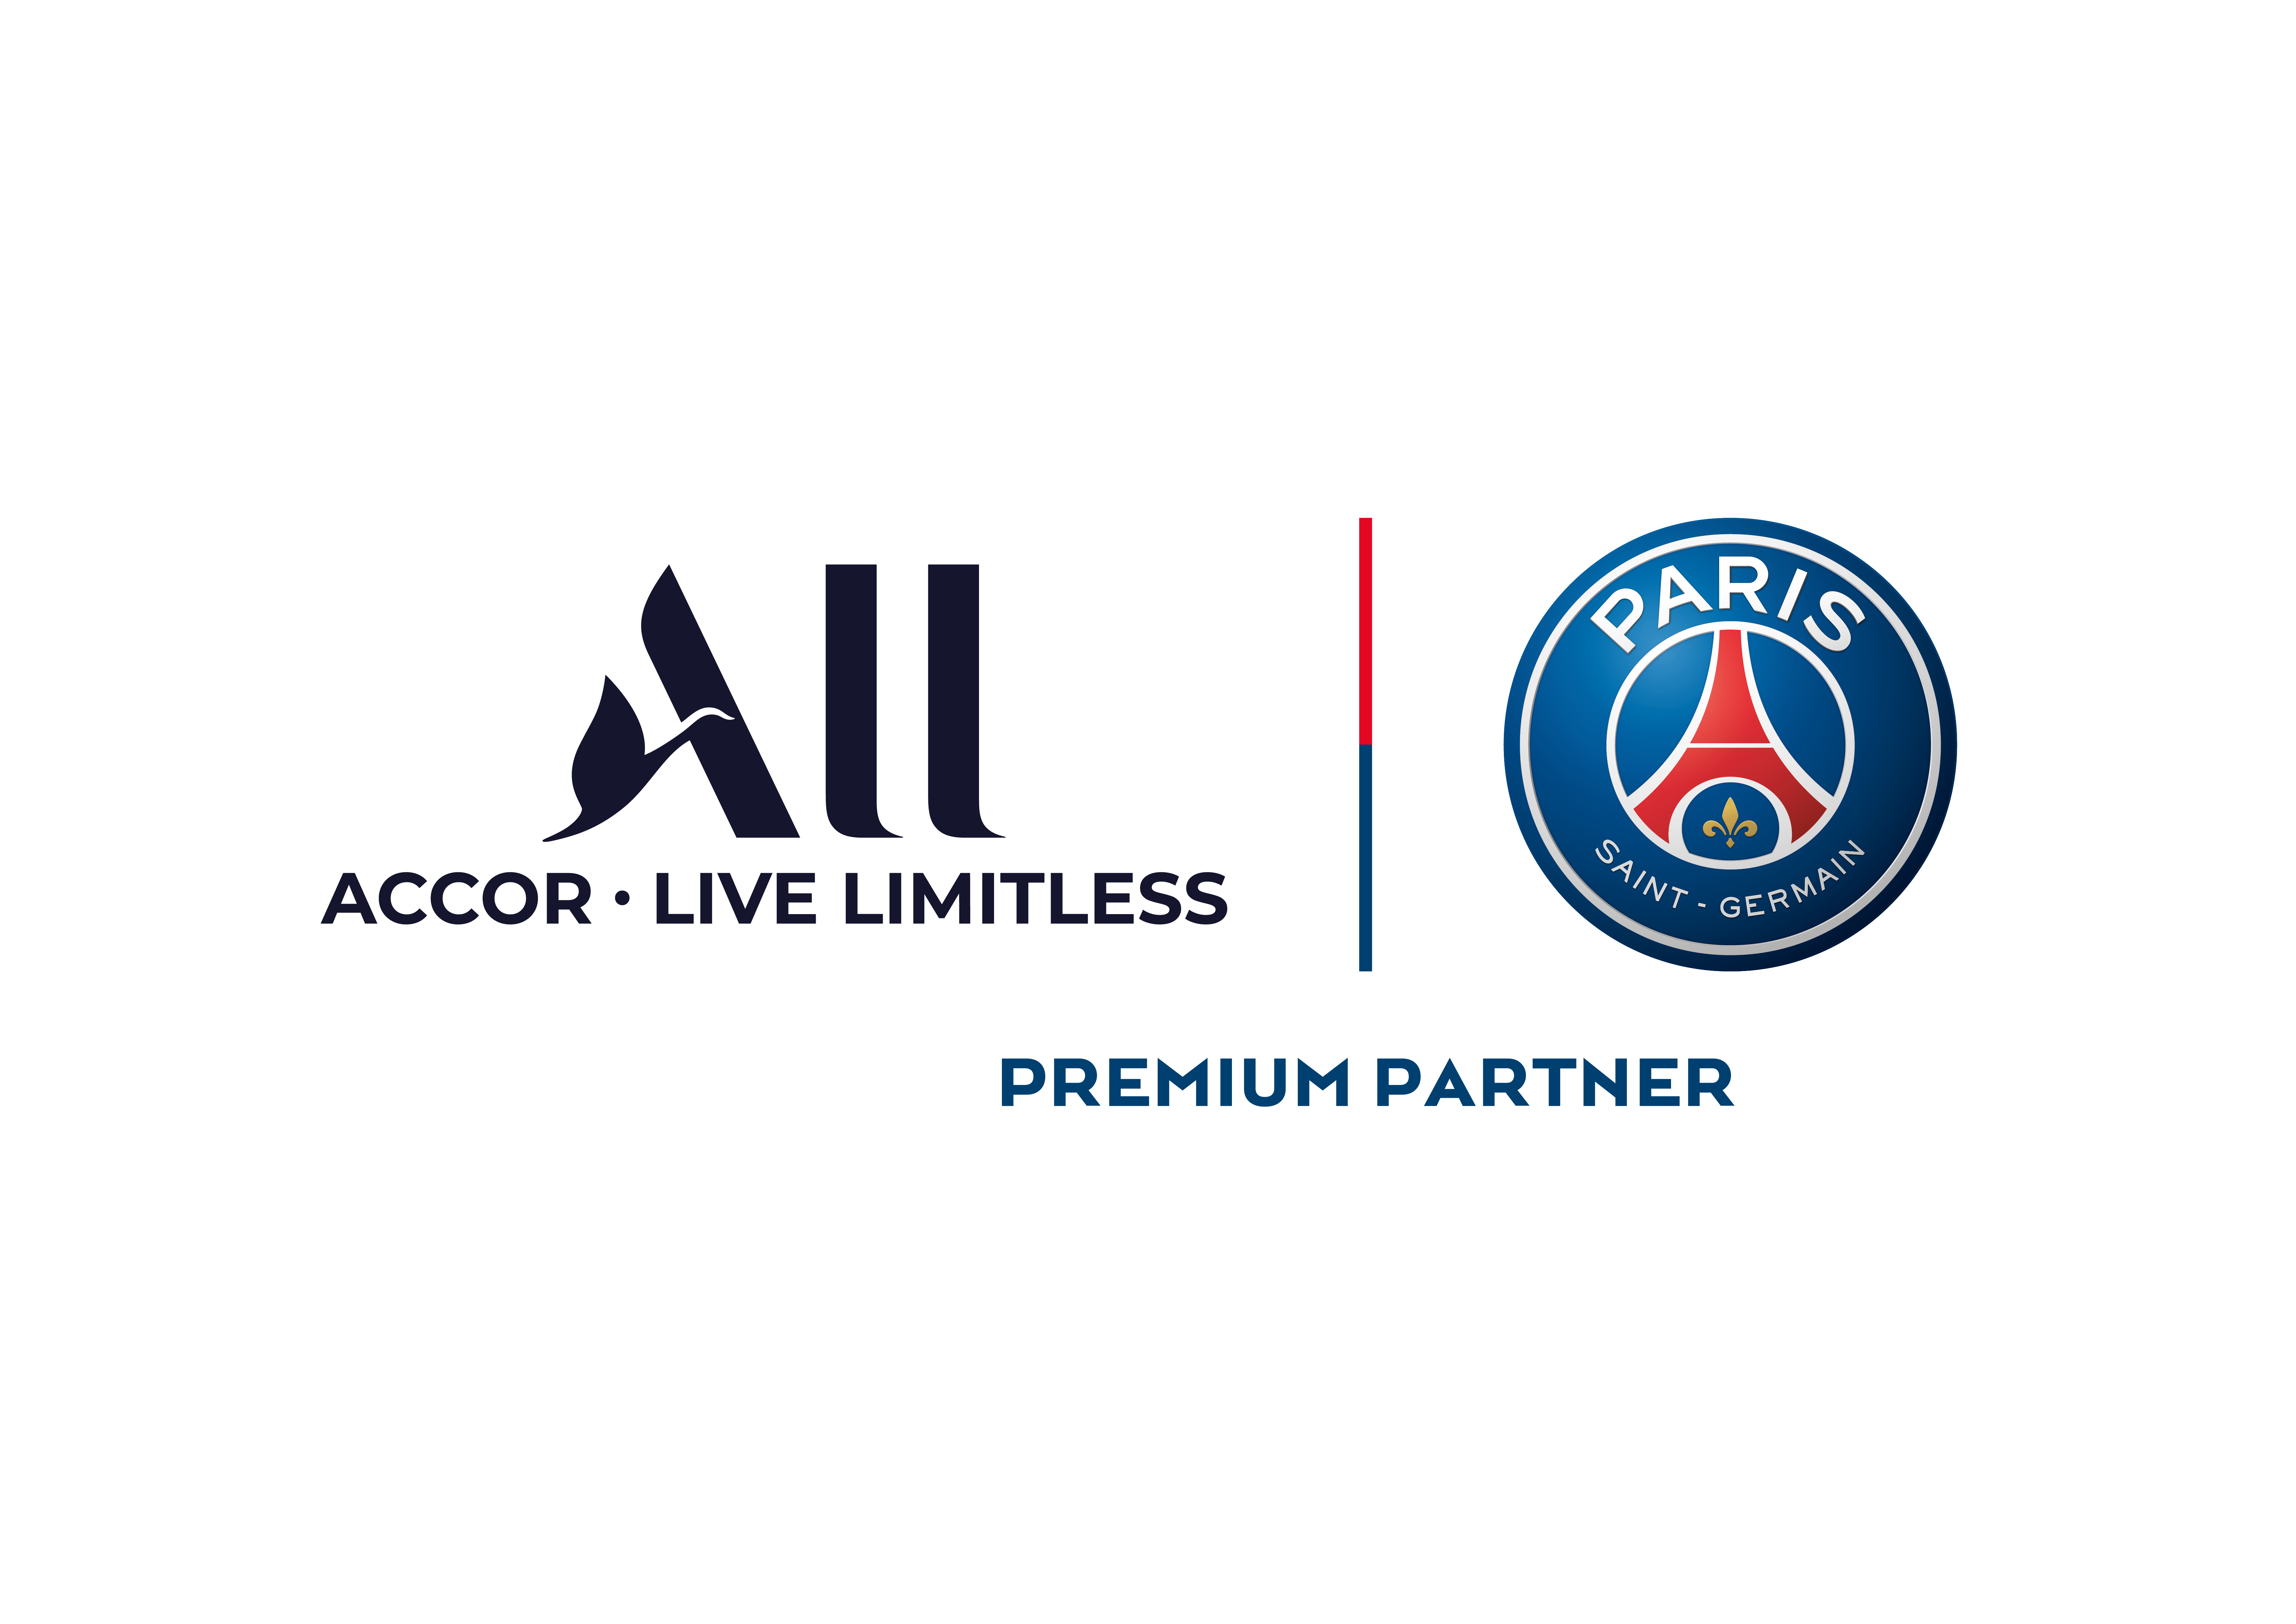 Giraffe Massage Nederigheid ALL-Accor Live Limitless sets out the next chapter with Paris Saint Germain  | Accor – Newsroom